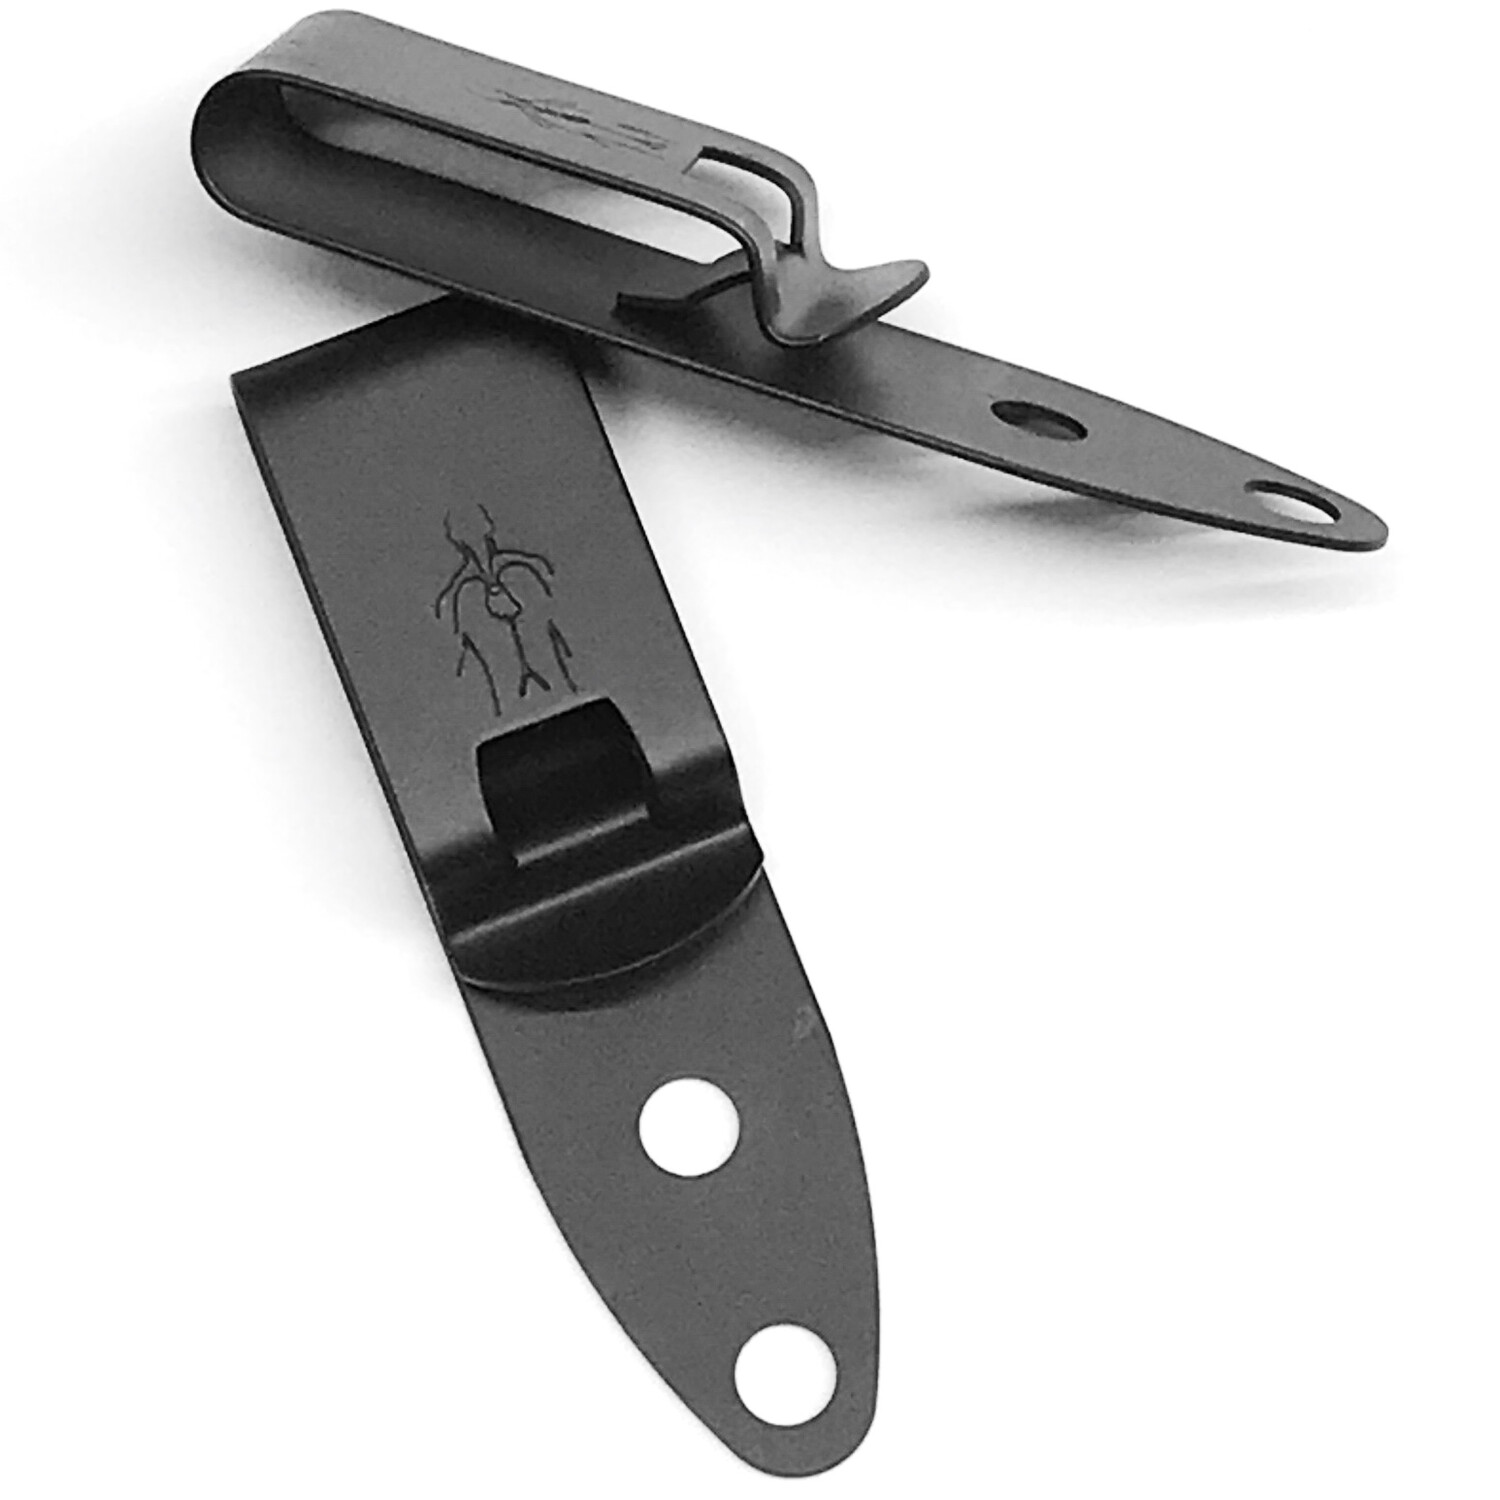 Mod 2.2 - HLR Discreet Gear Clip™ - Behind the belt **Back In Stock 3/29**